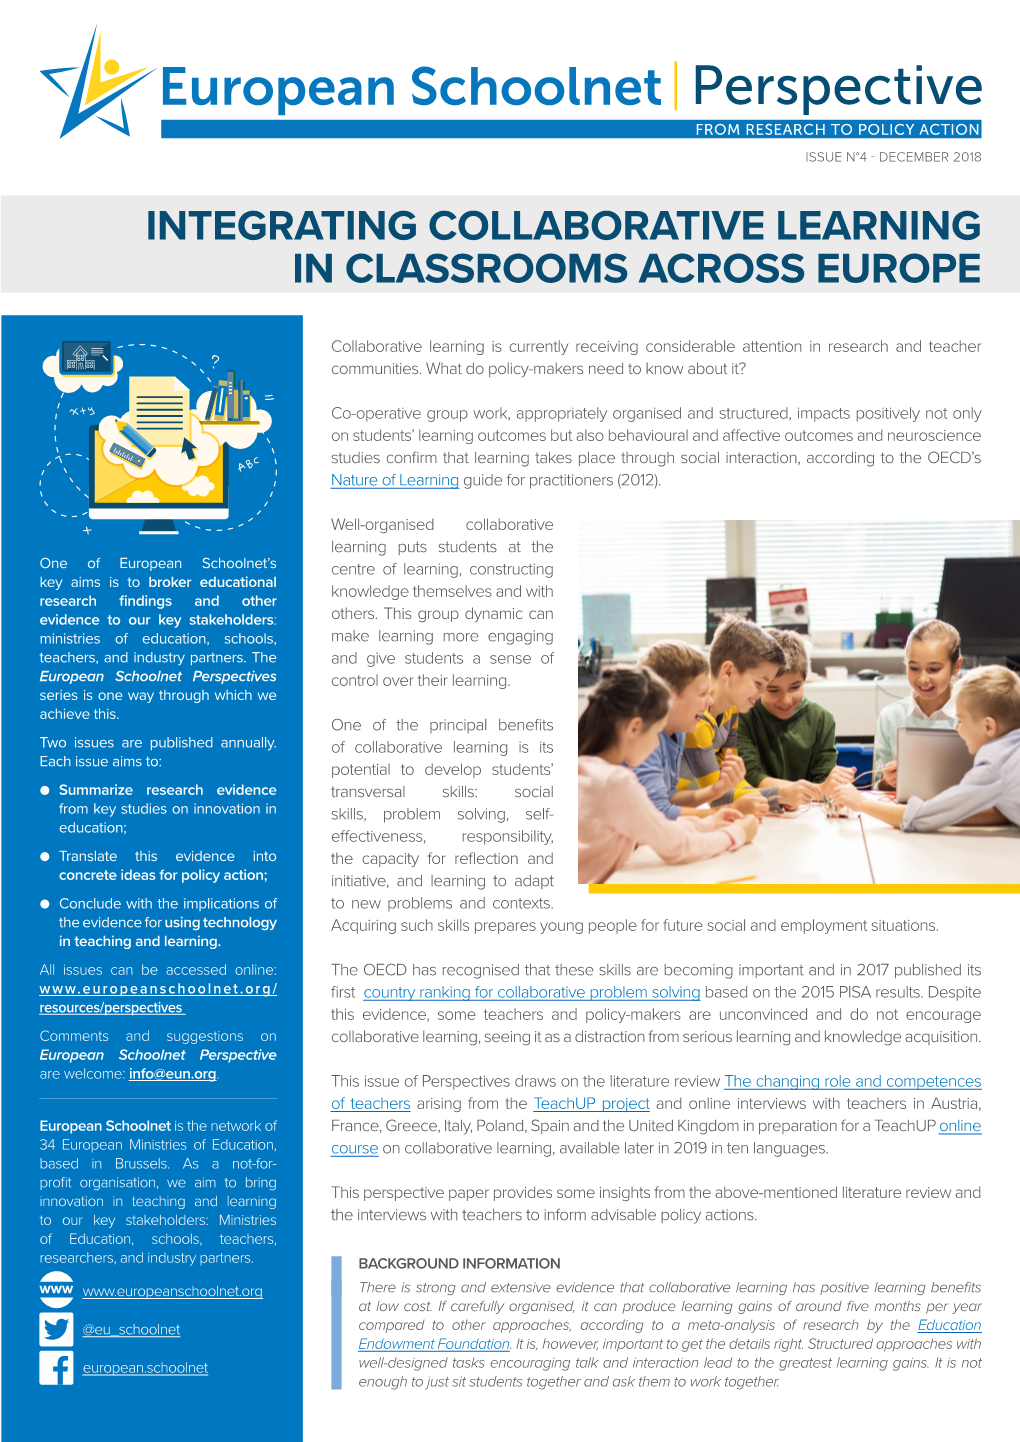 Integrating Collaborative Learning in Classrooms Across Europe